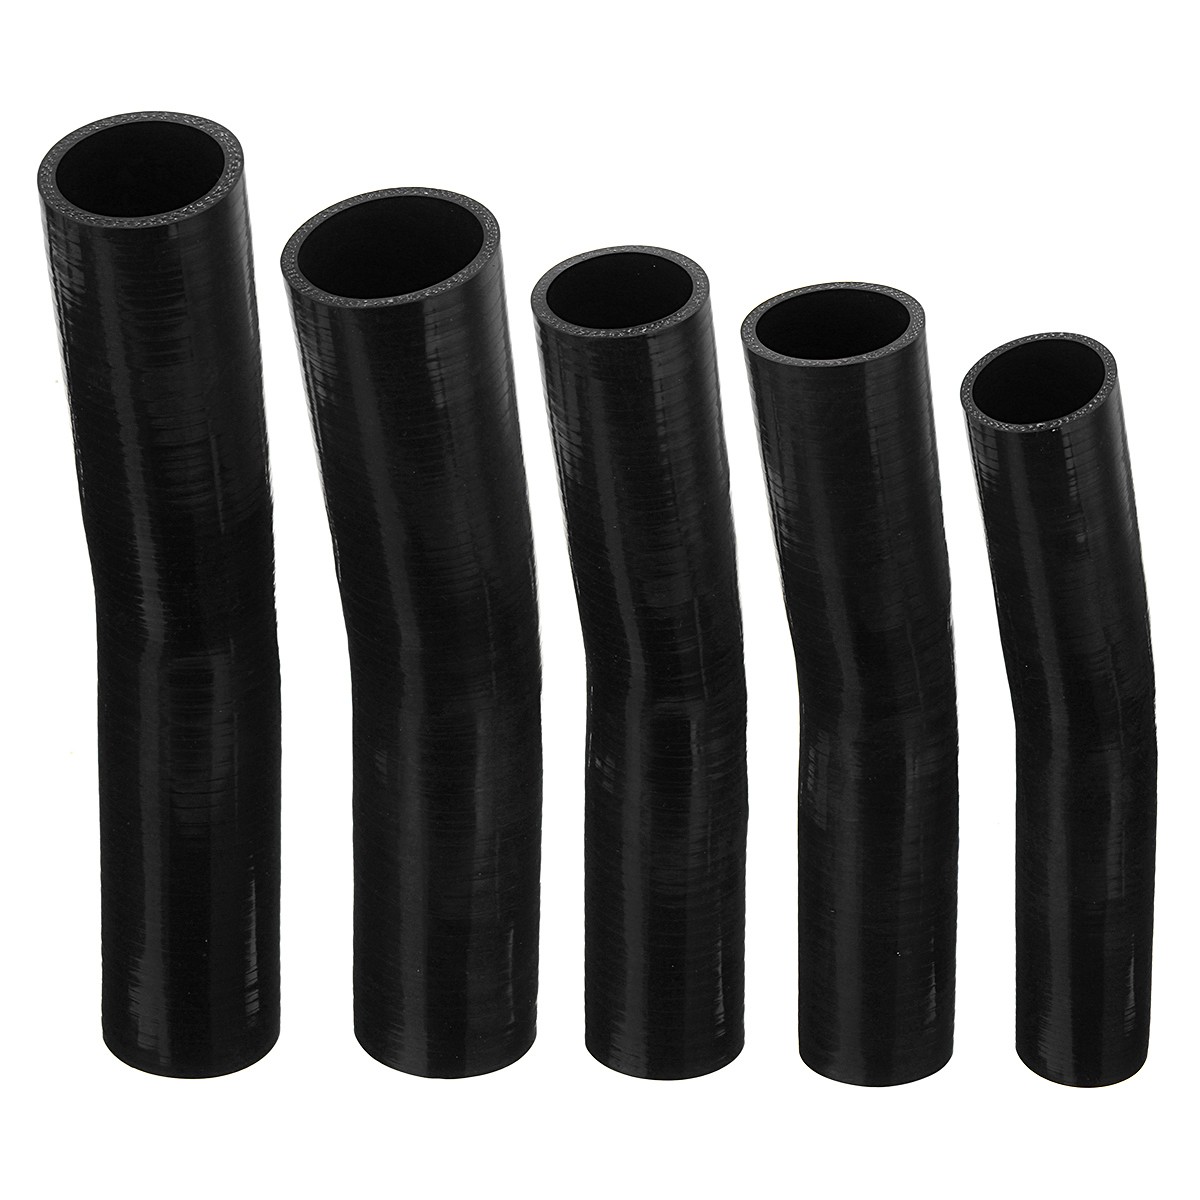 150mm-Black-Silicone-Hose-Rubber-15-Degree-Elbow-Bend-Hose-Air-Water-Coolant-Joiner-Pipe-Tube-1591449-7